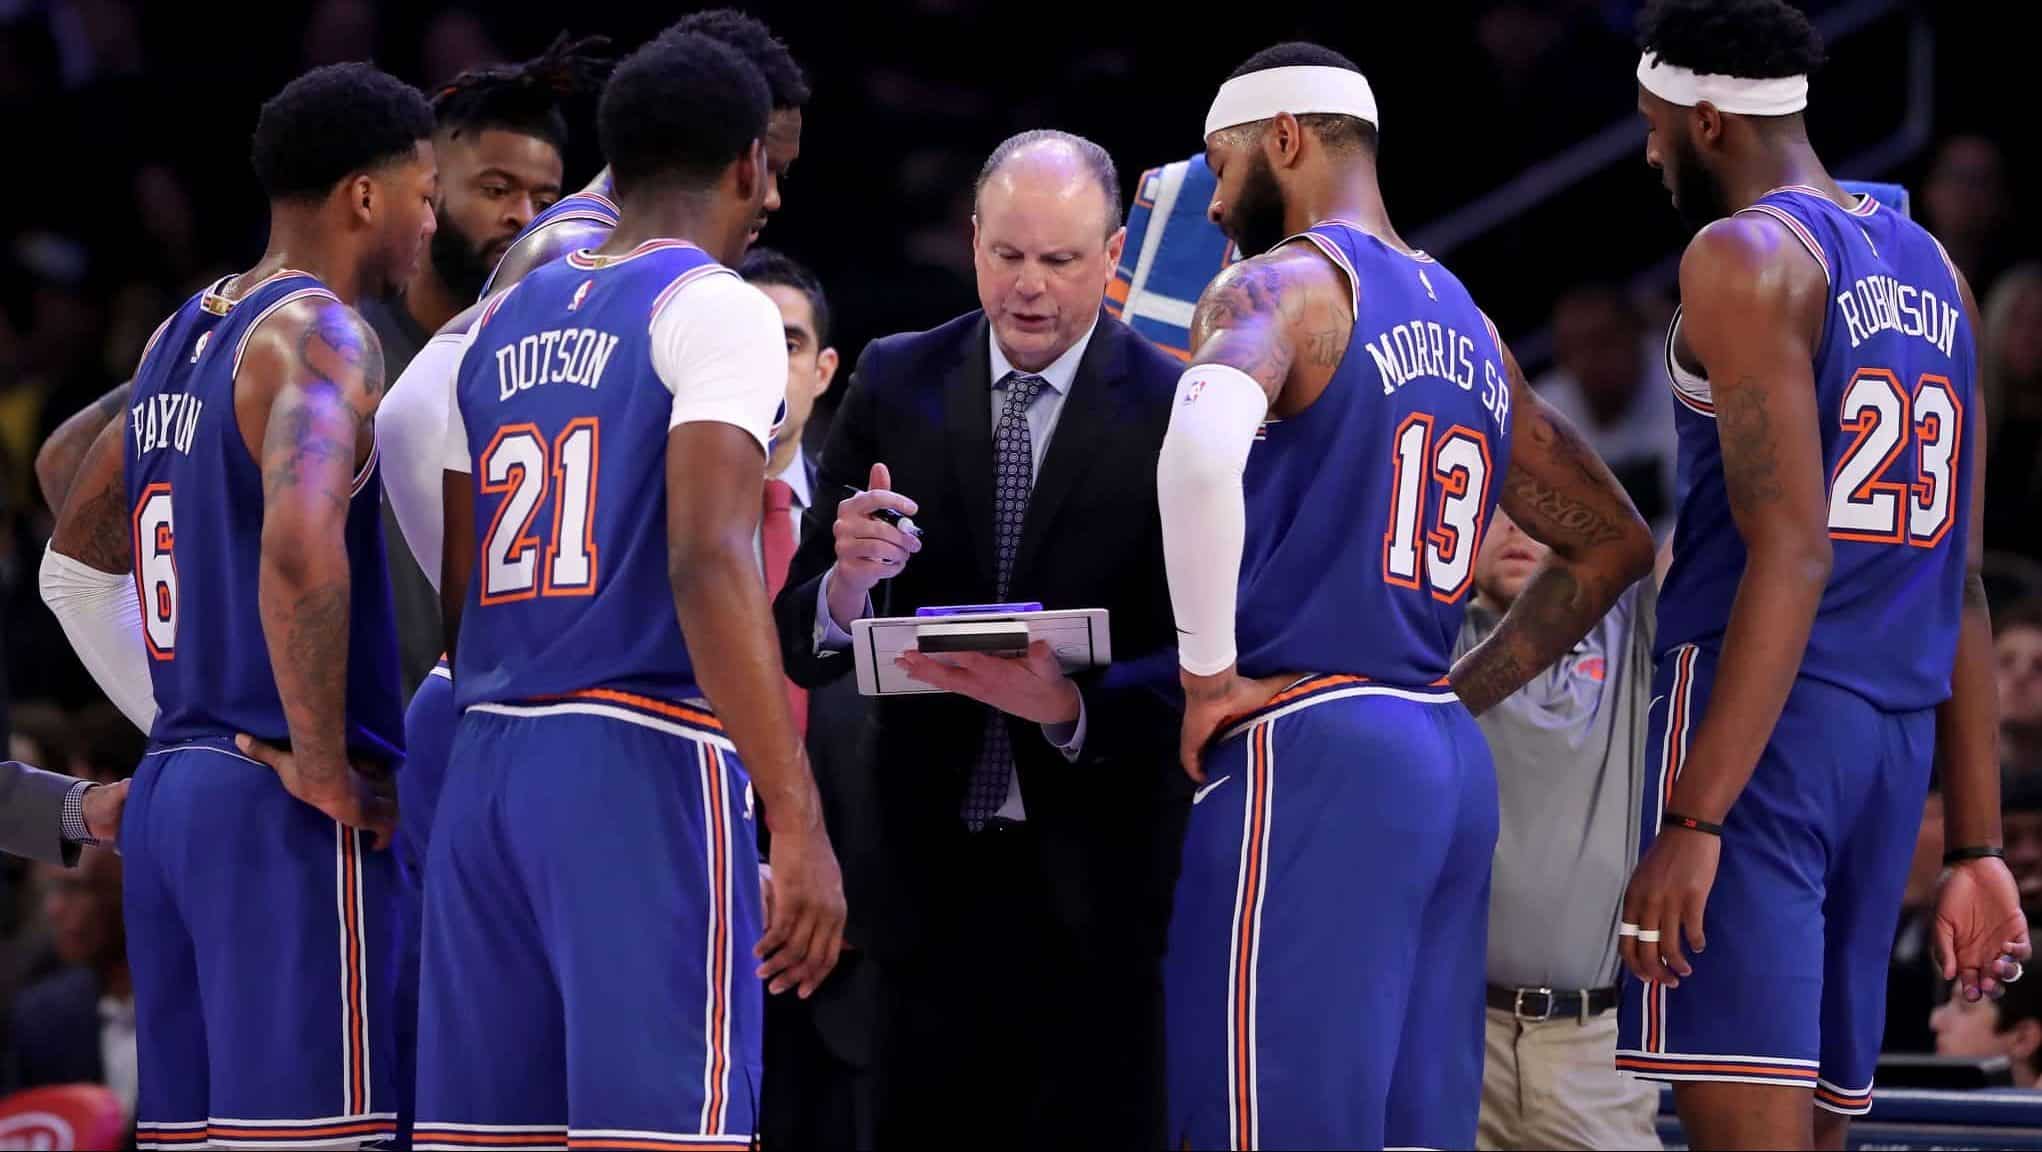 NEW YORK, NEW YORK - JANUARY 22: Mike Miller of the New York Knicks talks to his players during a time out in the fourth quarter against the Los Angeles Lakers at Madison Square Garden on January 22, 2020 in New York City.NOTE TO USER: User expressly acknowledges and agrees that, by downloading and or using this photograph, User is consenting to the terms and conditions of the Getty Images License Agreement.